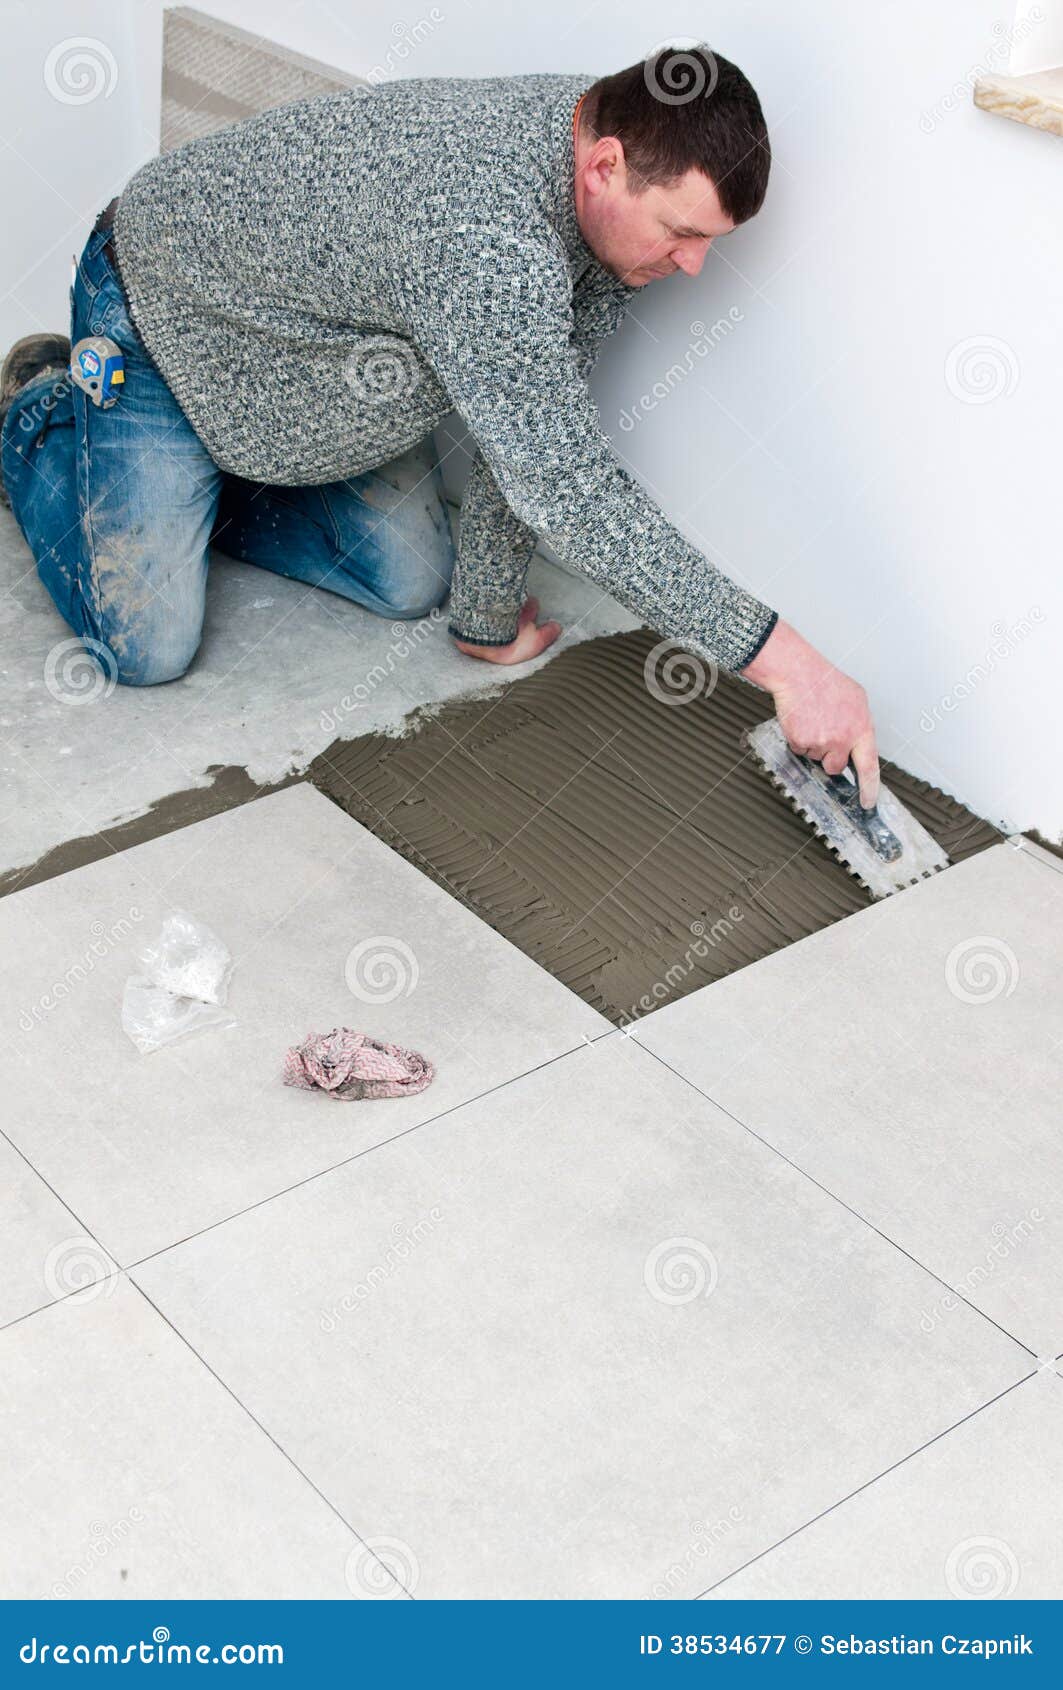 Tiler At Work Royalty Free Stock Photography - Image: 38534677